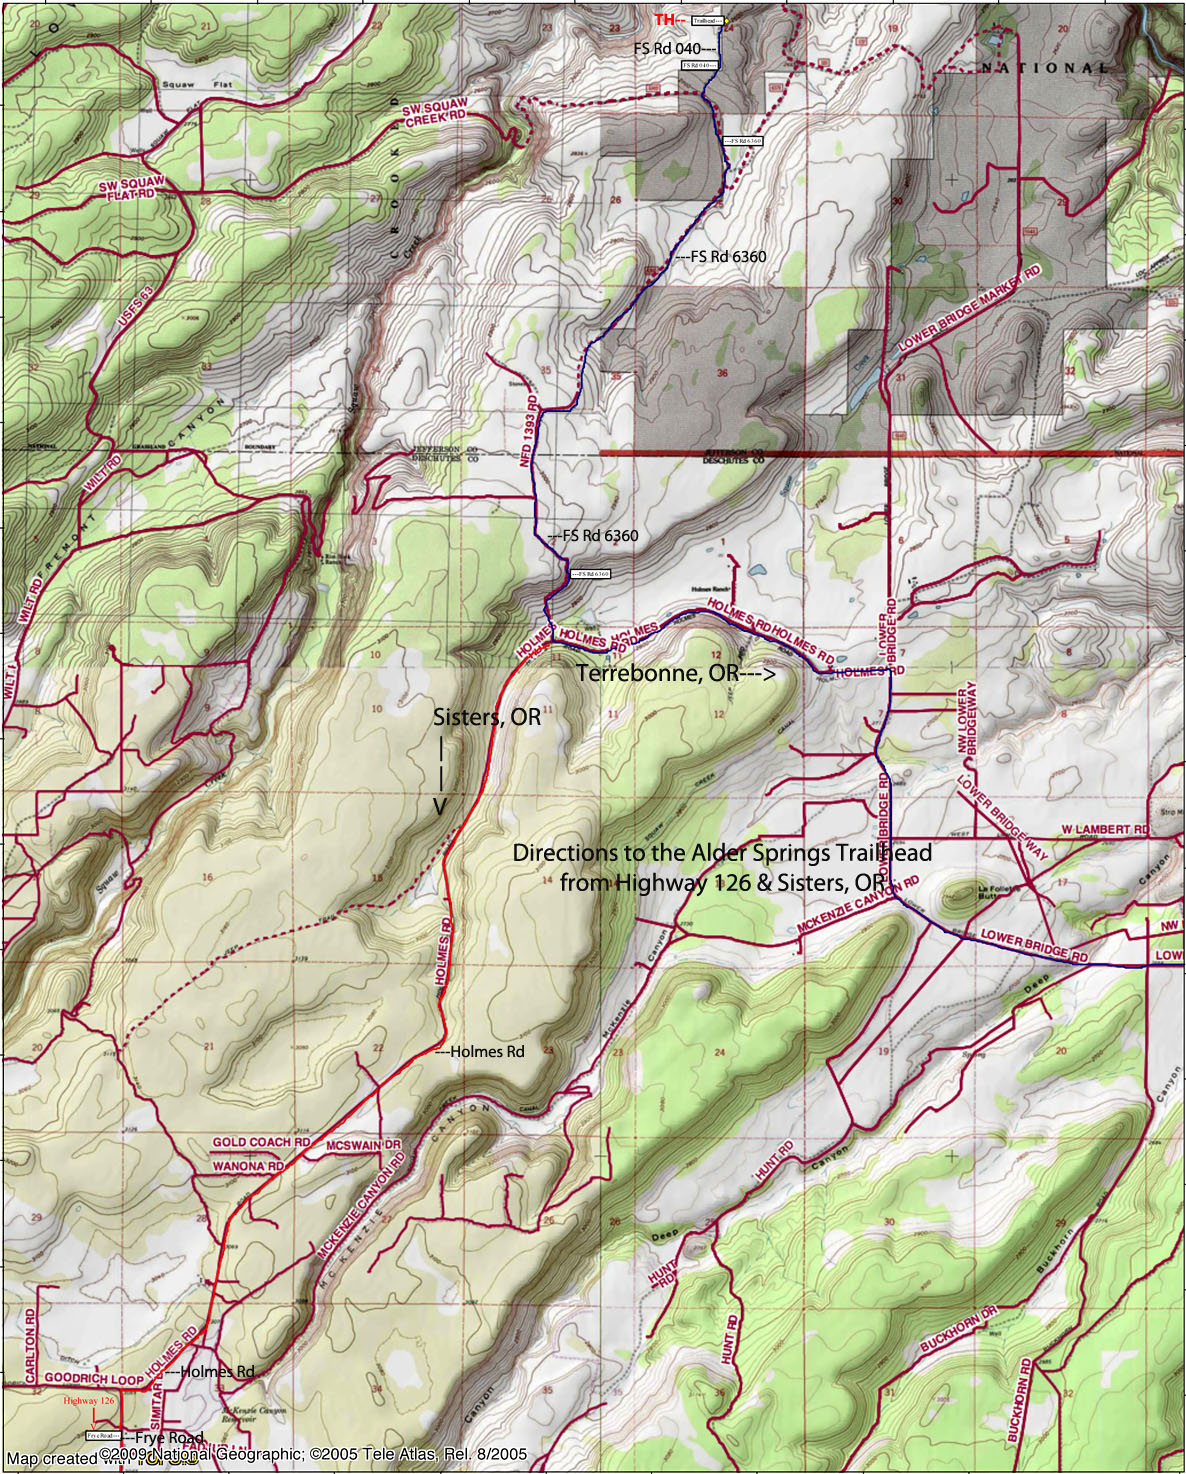 Map-Directions to Alder Springs Trailhead from Sisters and OR Highway 126